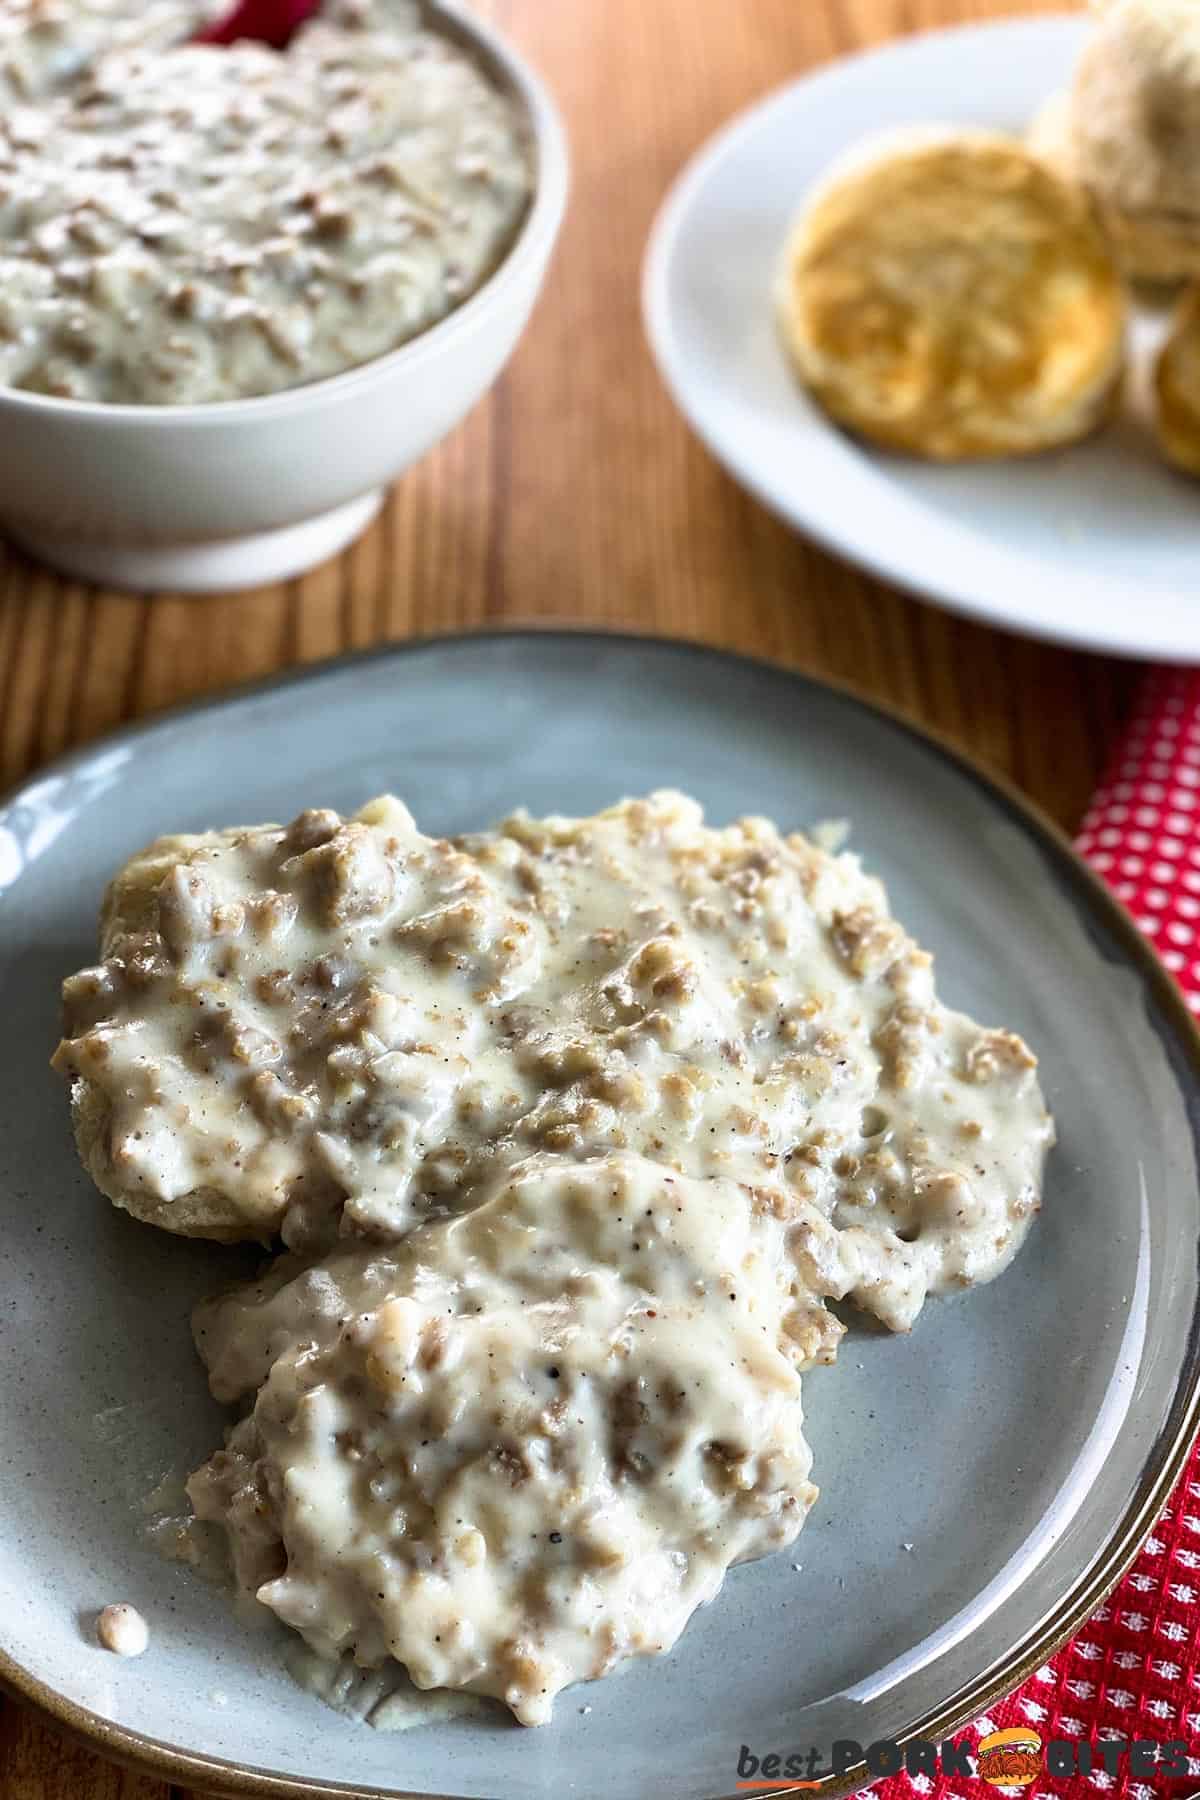 a plate of biscuits with sausage gravy next to a bowl of gravy and more biscuits